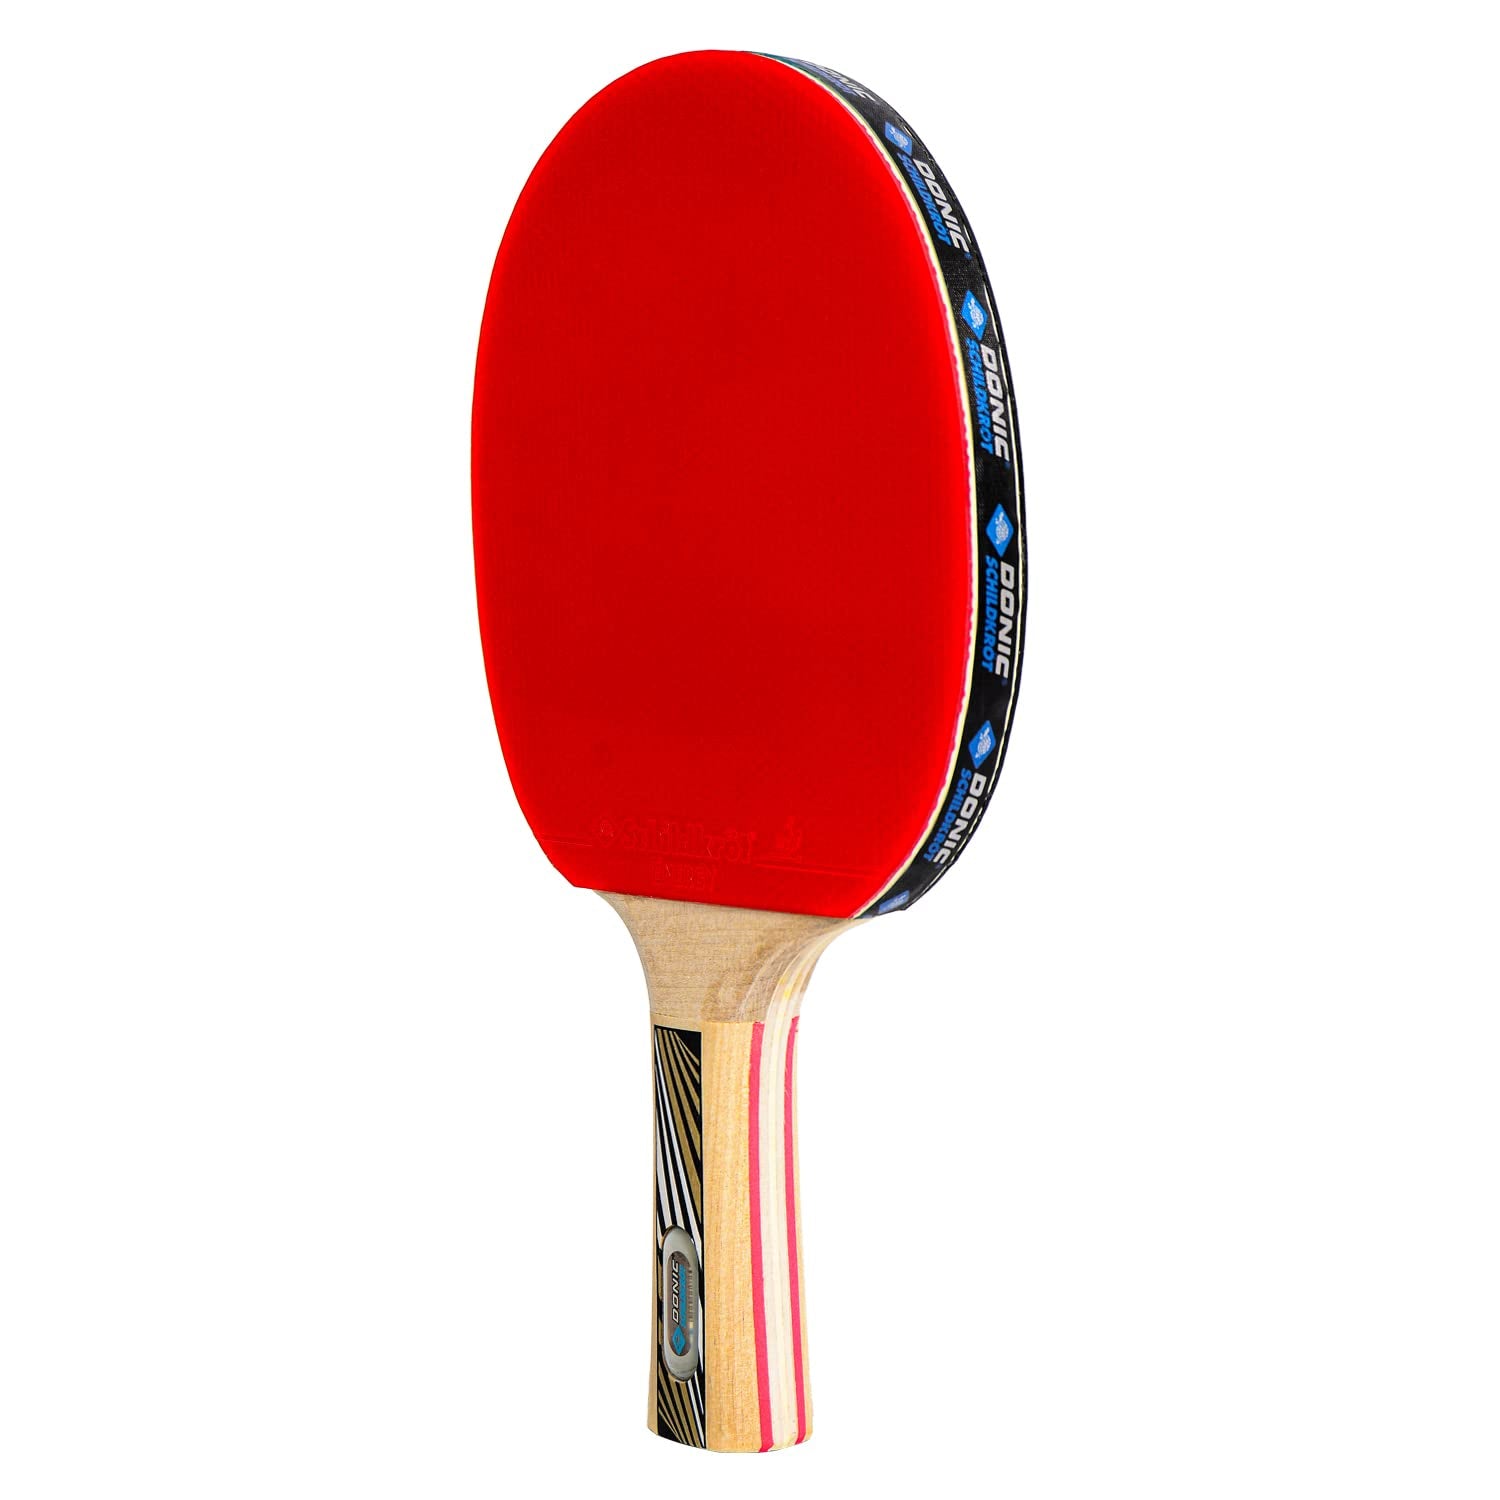 Donic Legends Gold Table Tennis Bat with Cover - Best Price online Prokicksports.com